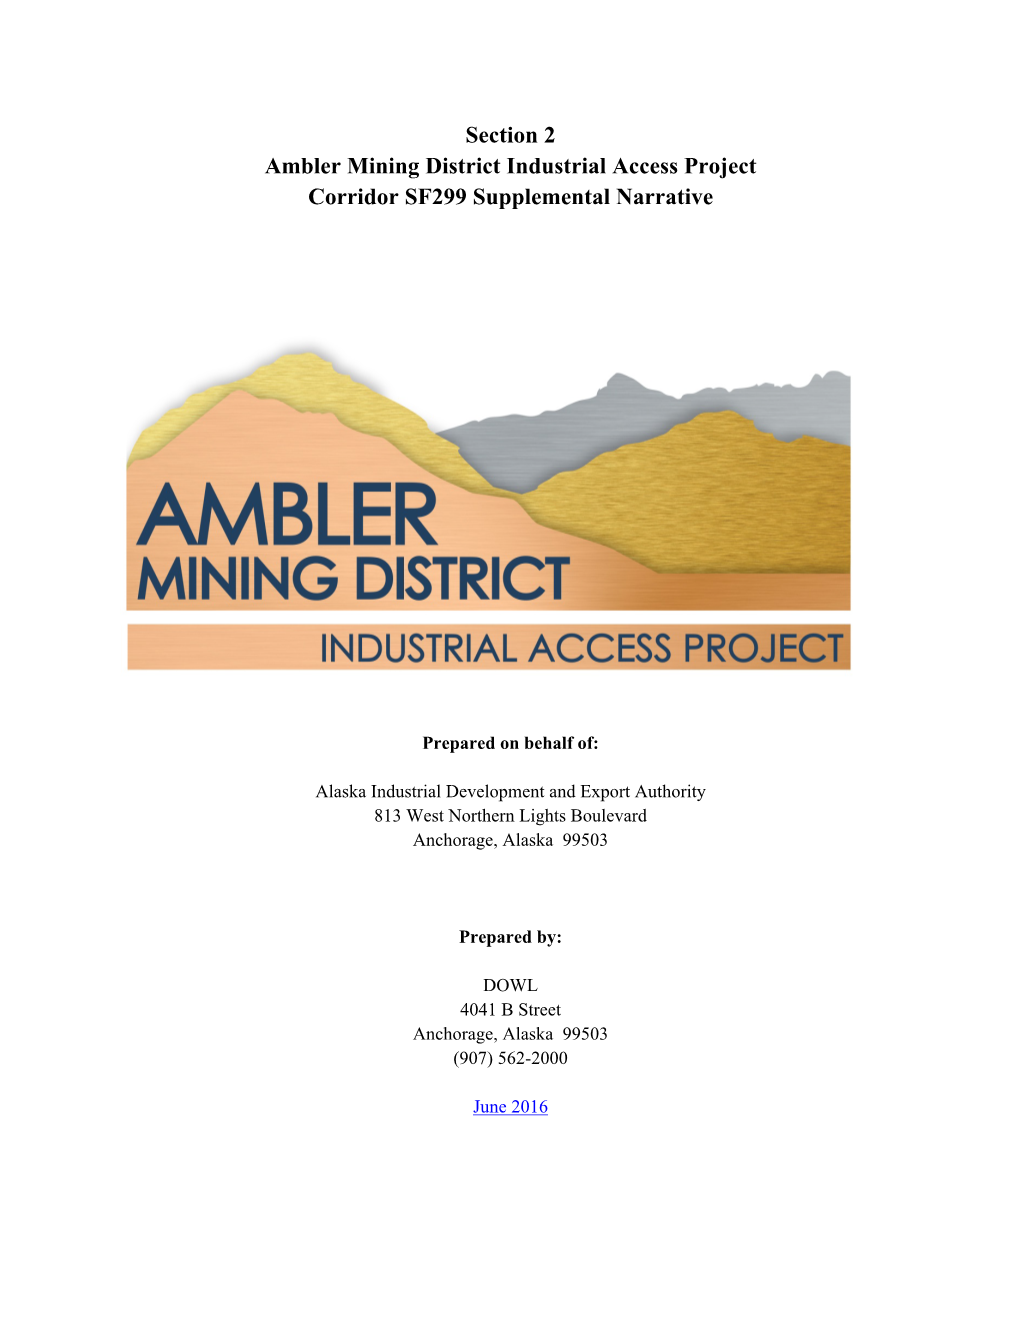 Section 2 Ambler Mining District Industrial Access Project Corridor SF299 Supplemental Narrative